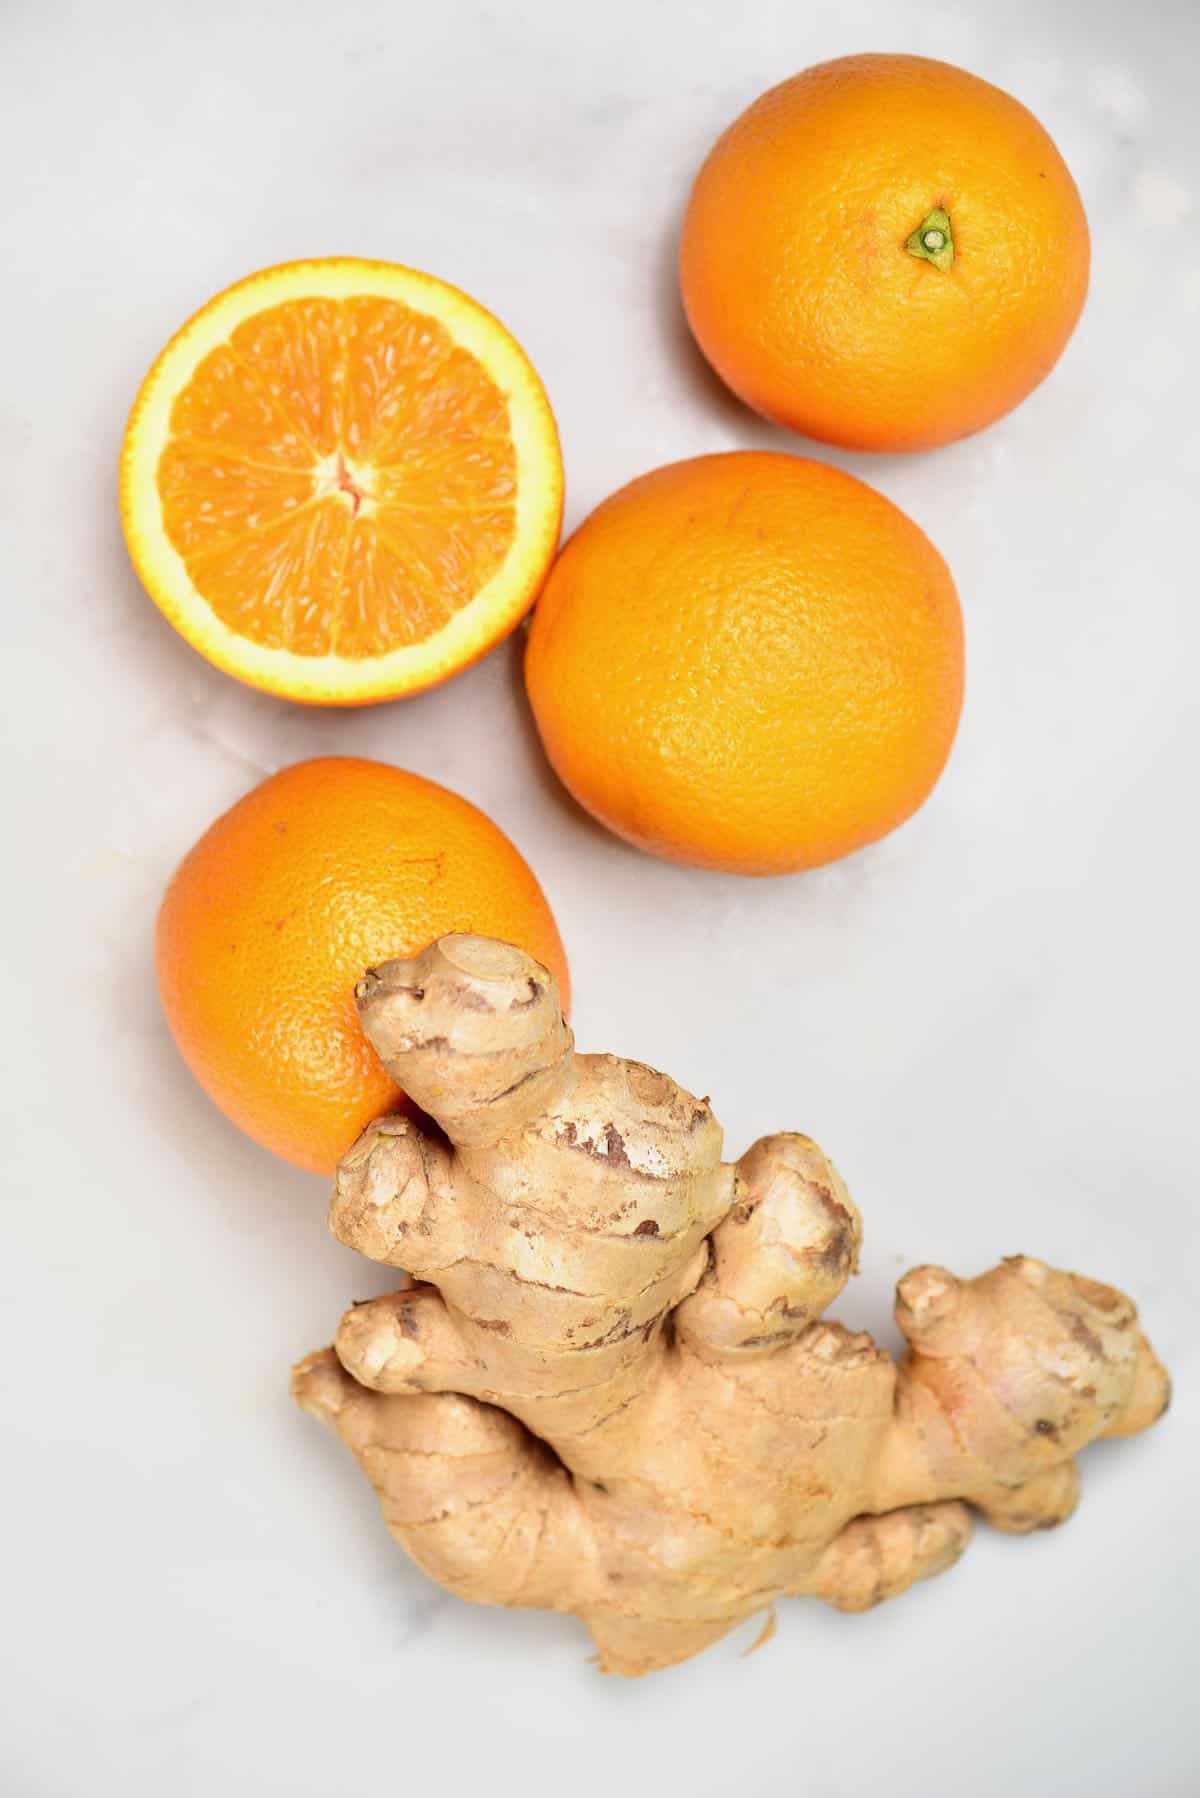 Oranges and ginger on a flat surface